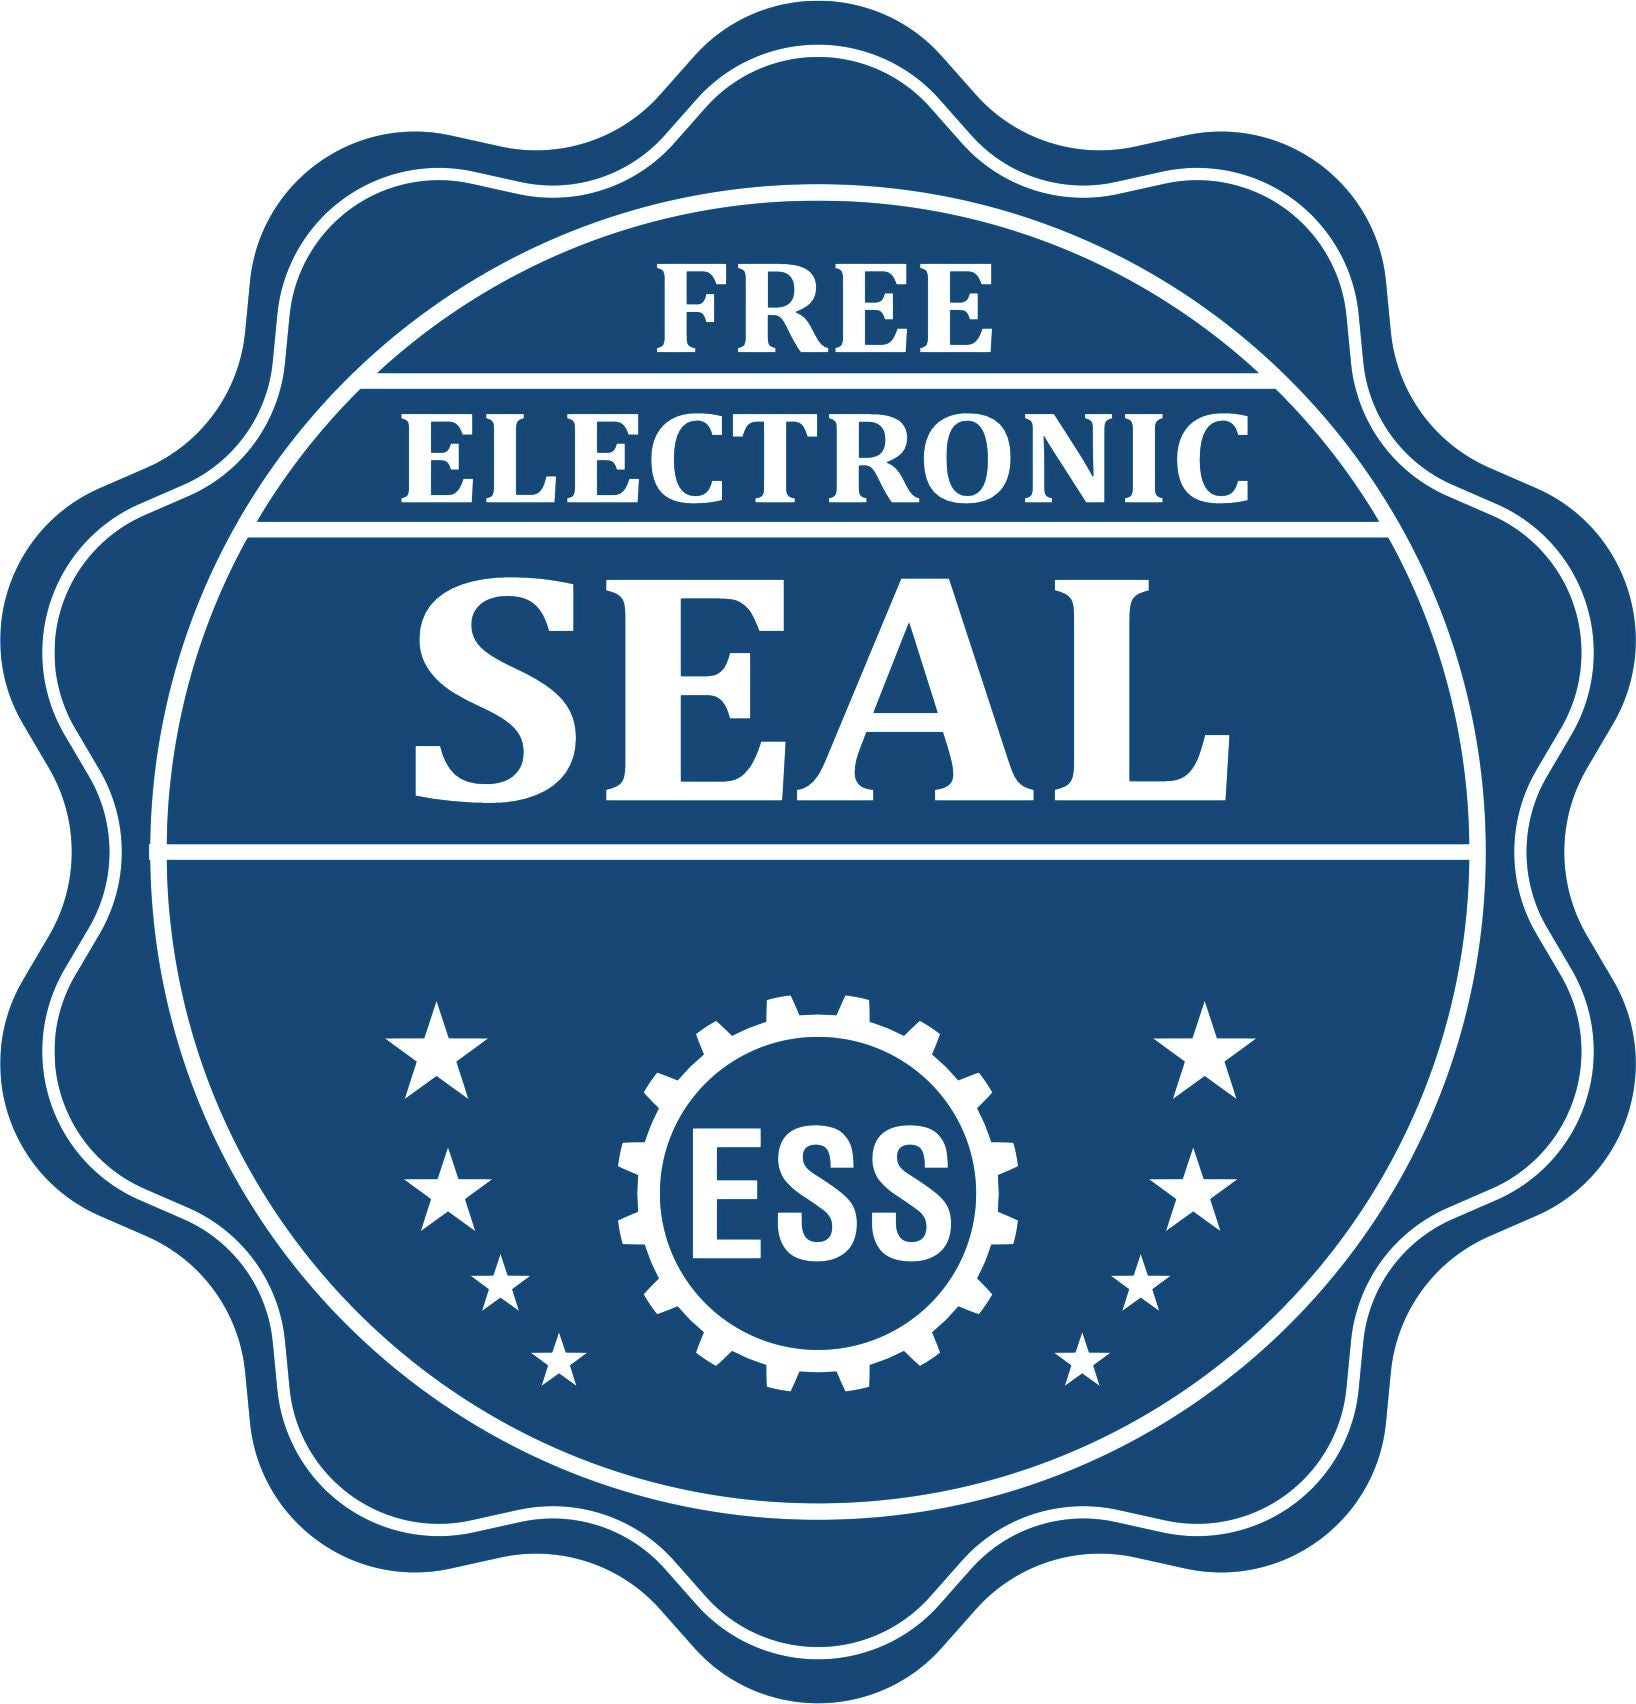 A badge showing a free electronic seal for the Soft Michigan Professional Engineer Seal with stars and the ESS gear on the emblem.